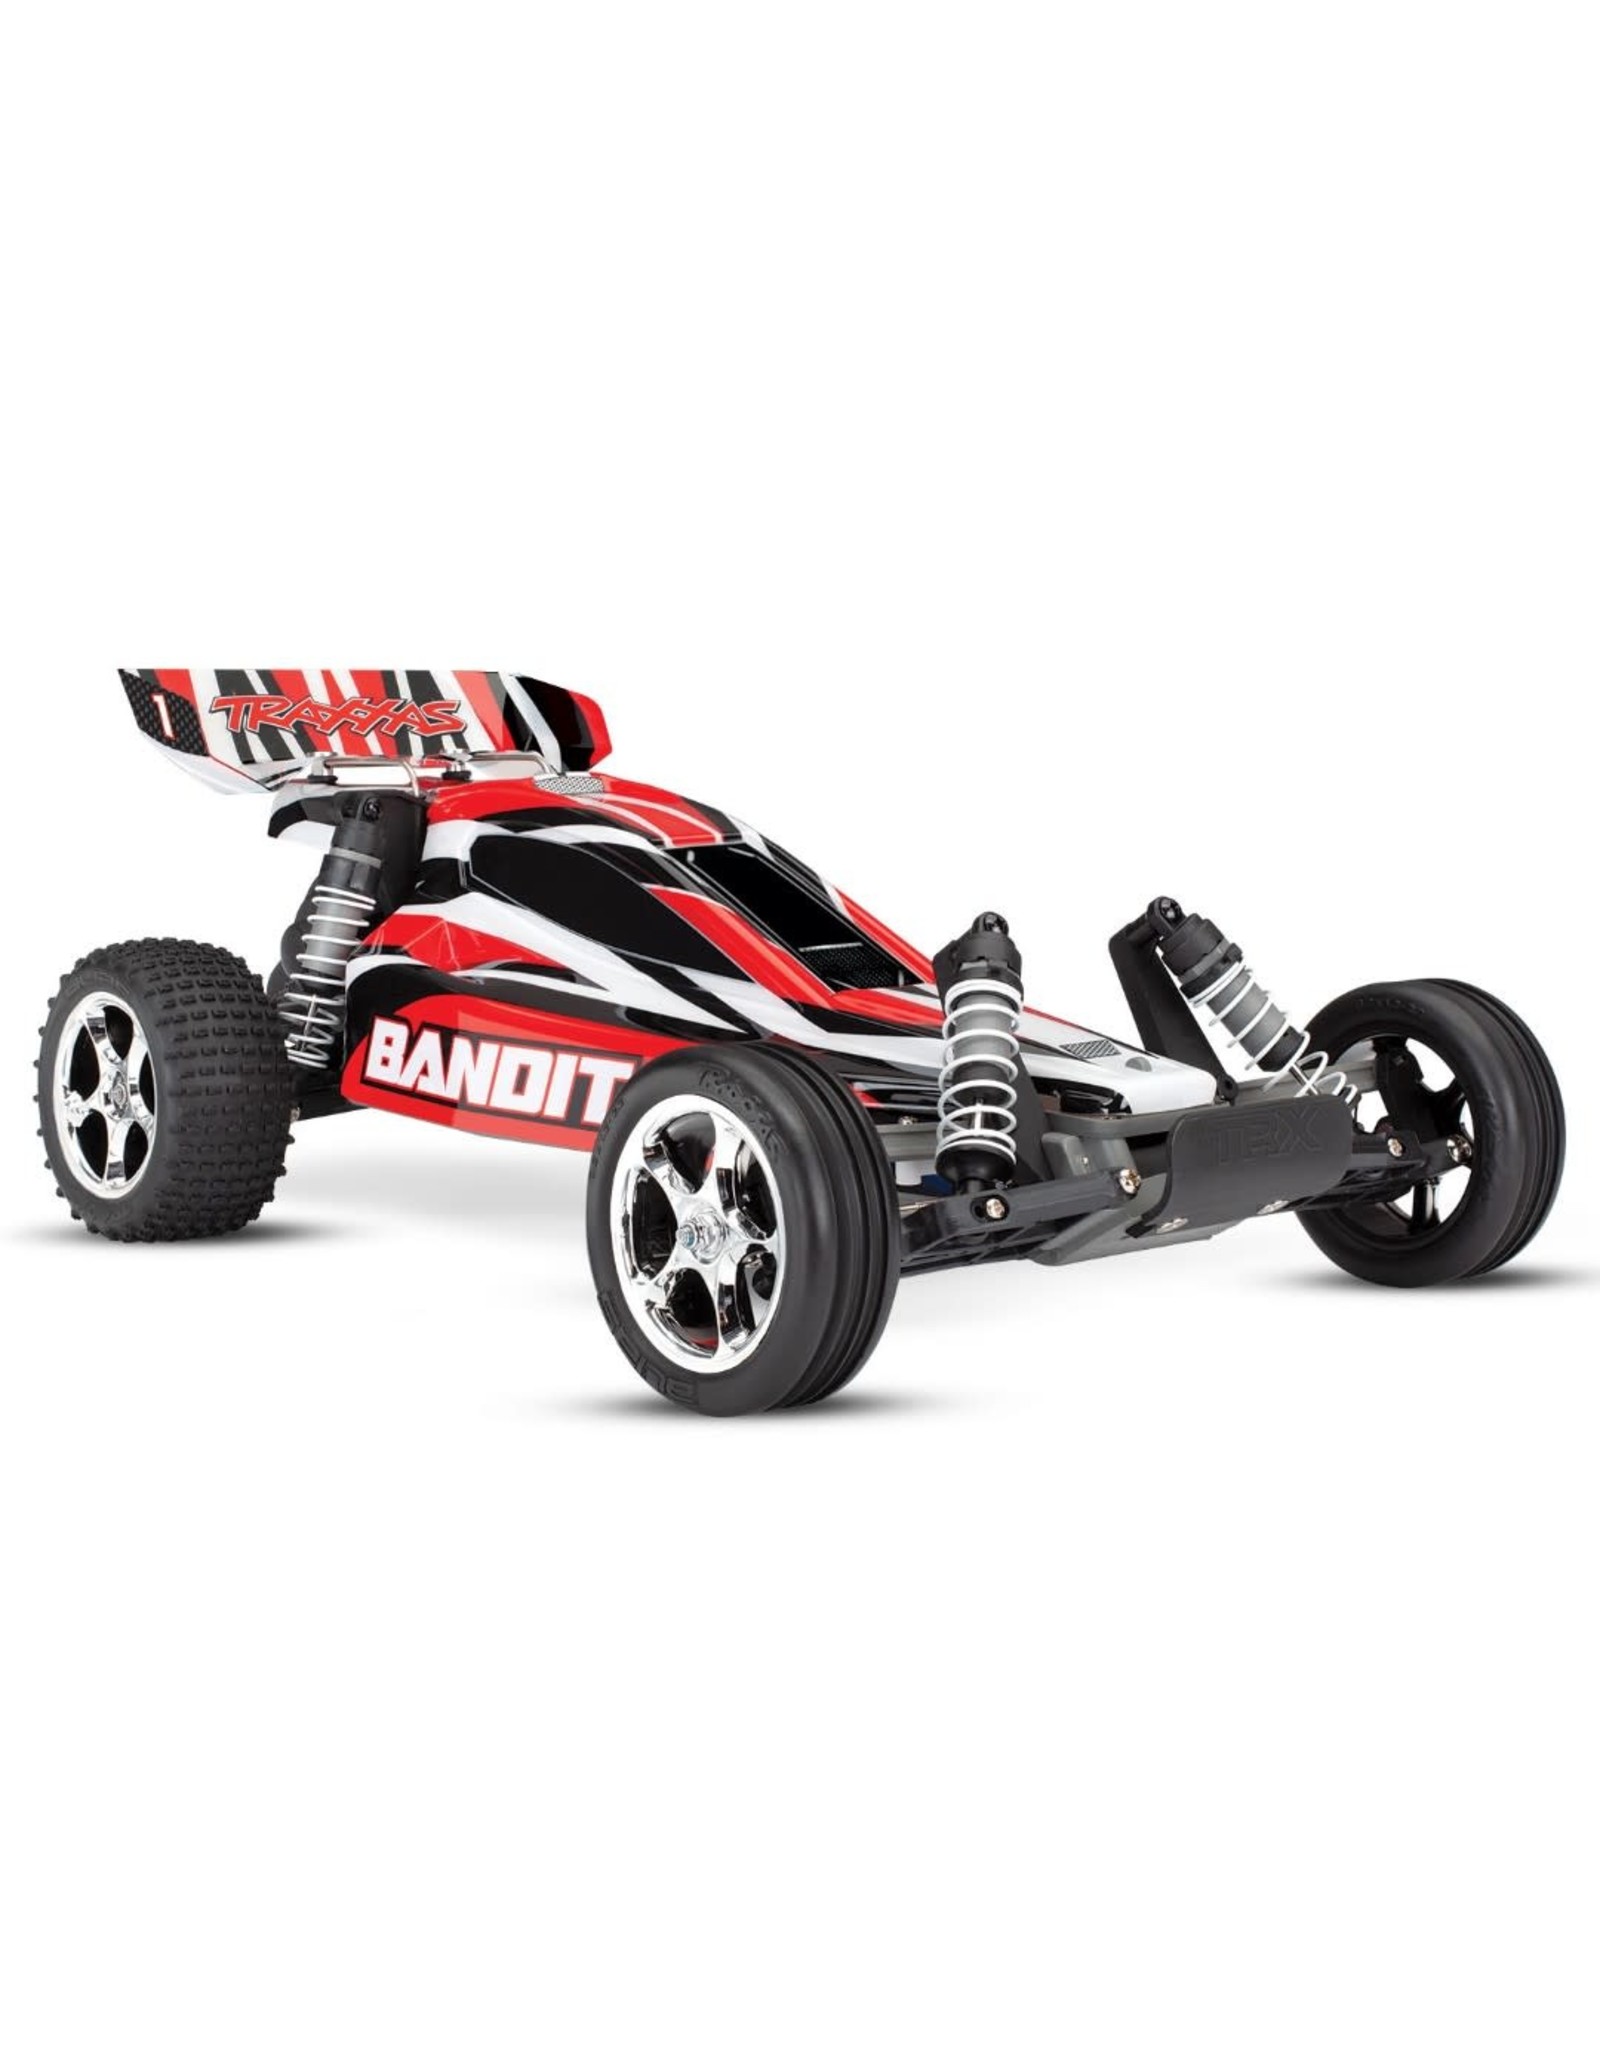 Traxxas Bandit 1/10 RTR Buggy RedX